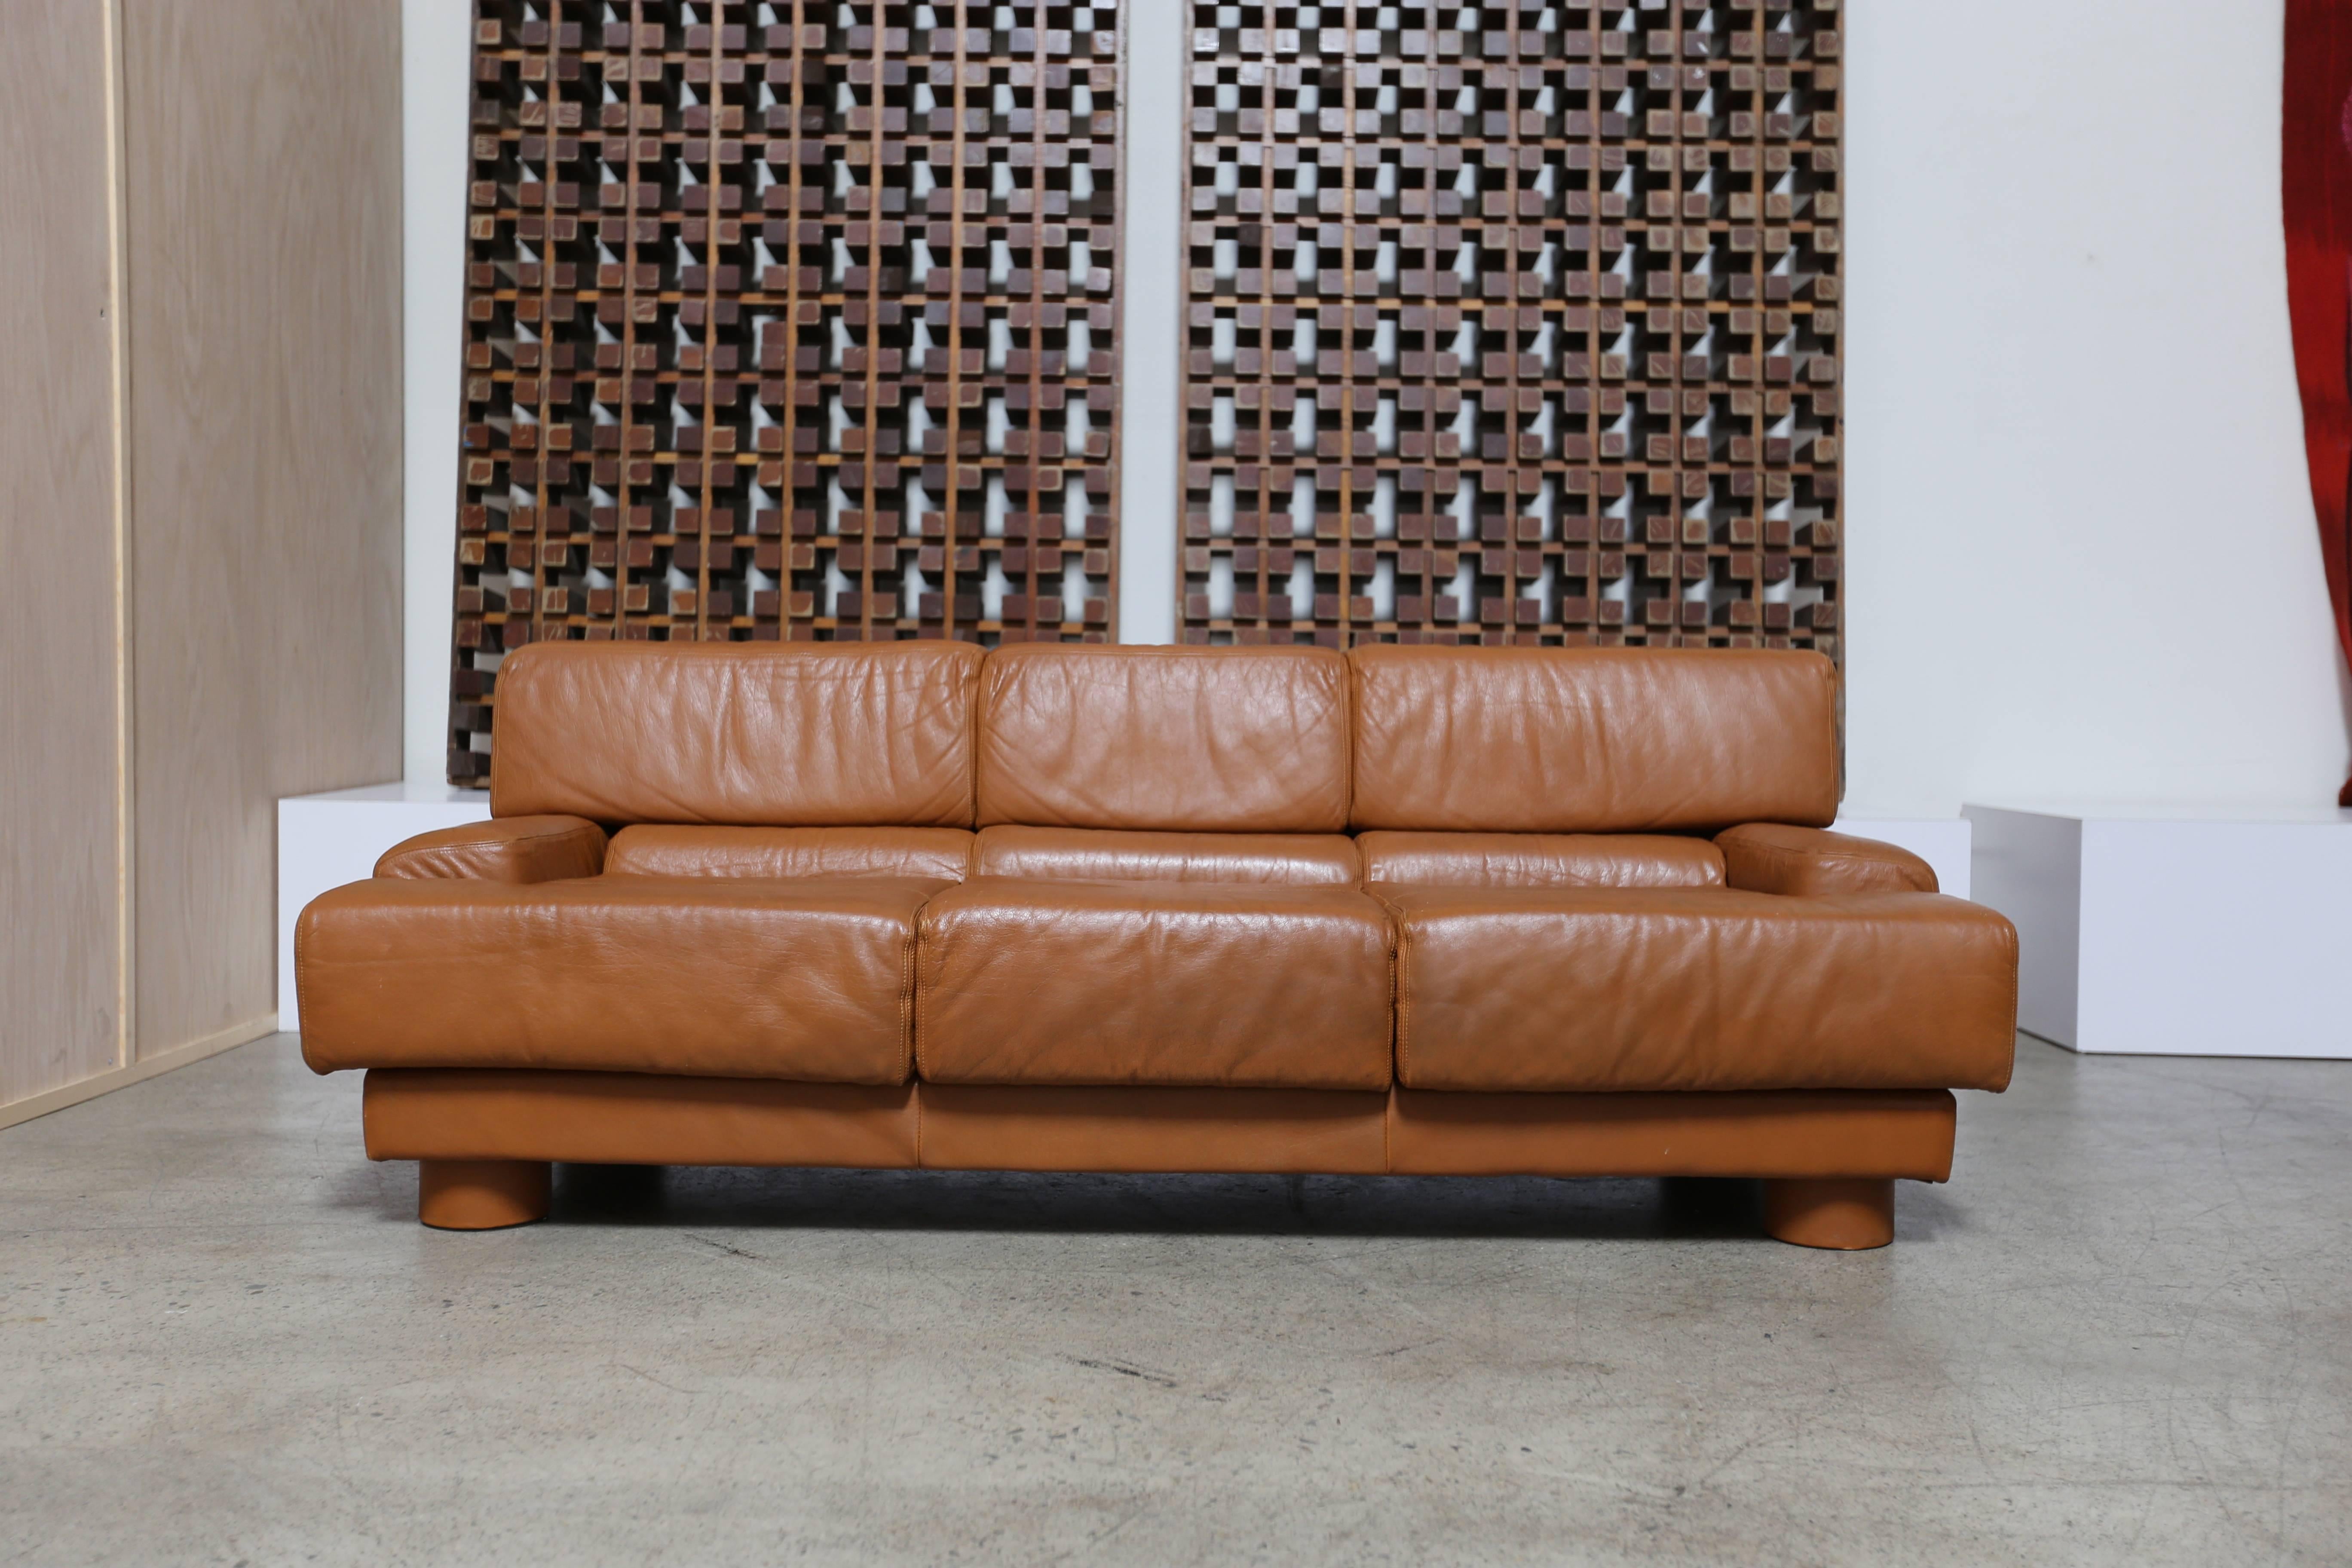 Mid-Century Modern Leather Sofa by Percival Lafer